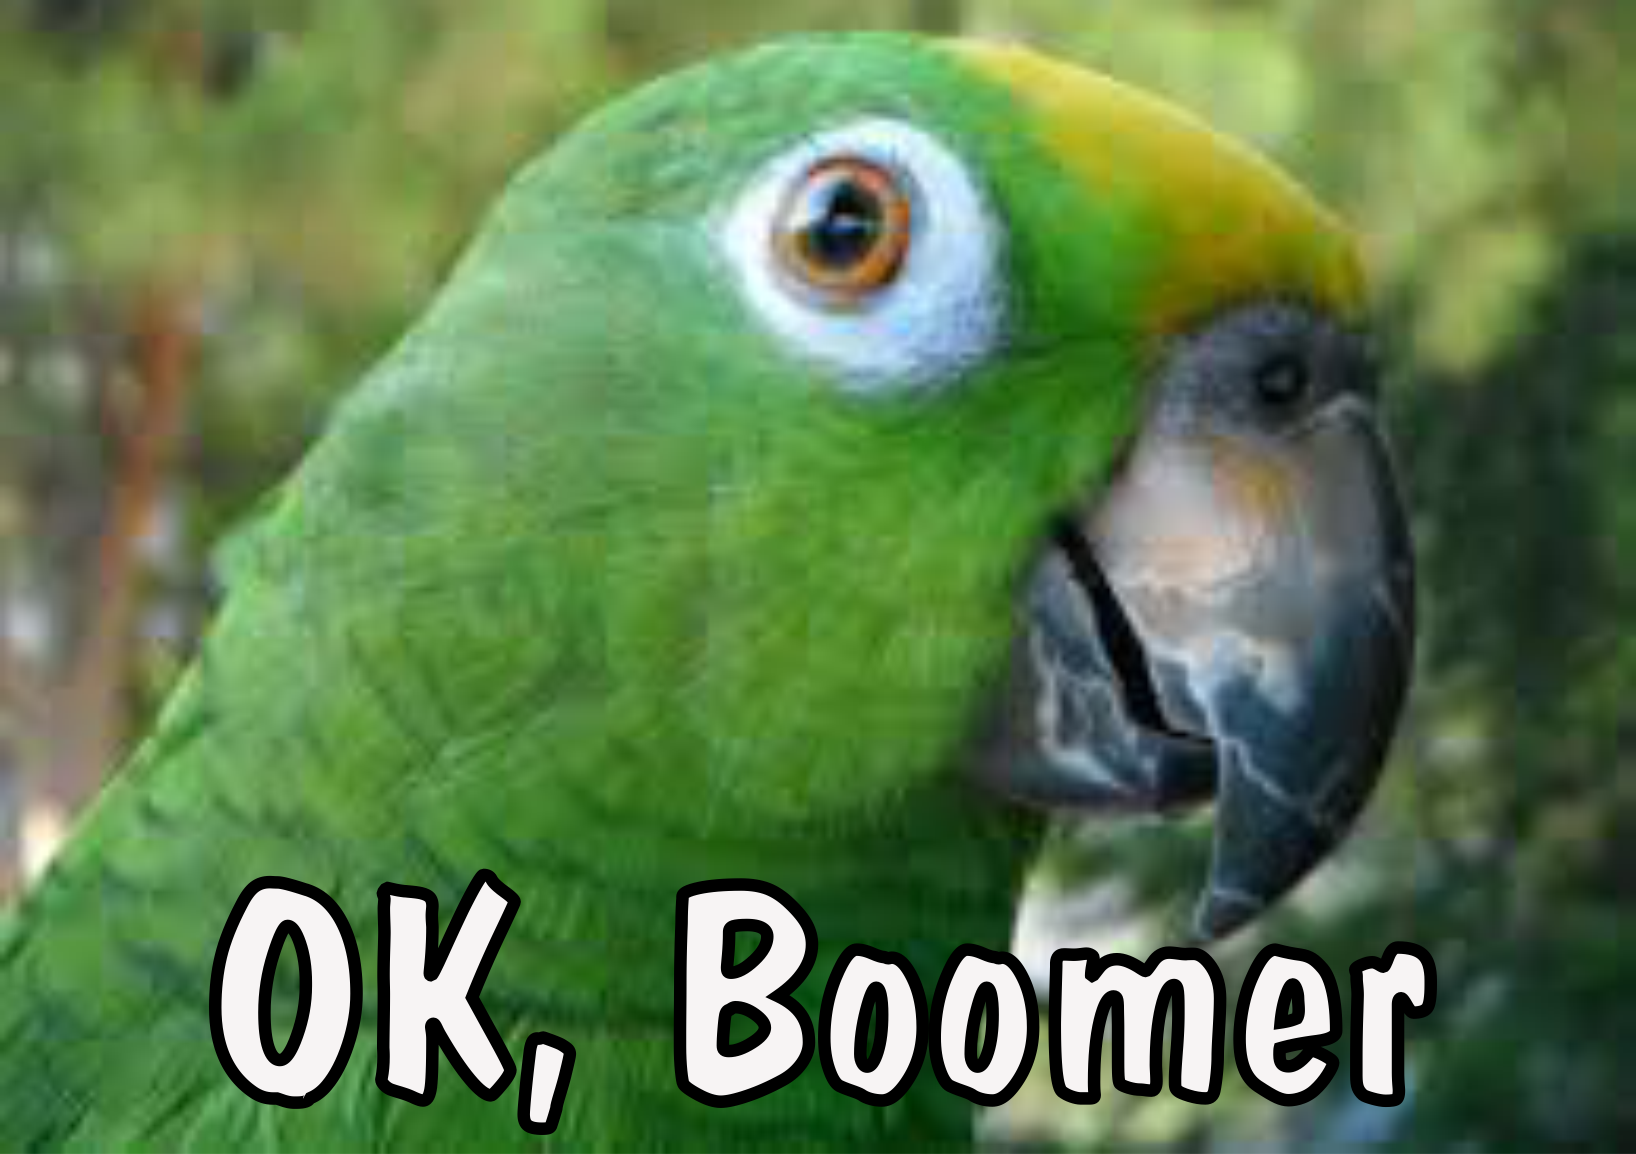 What Is Boomerism?